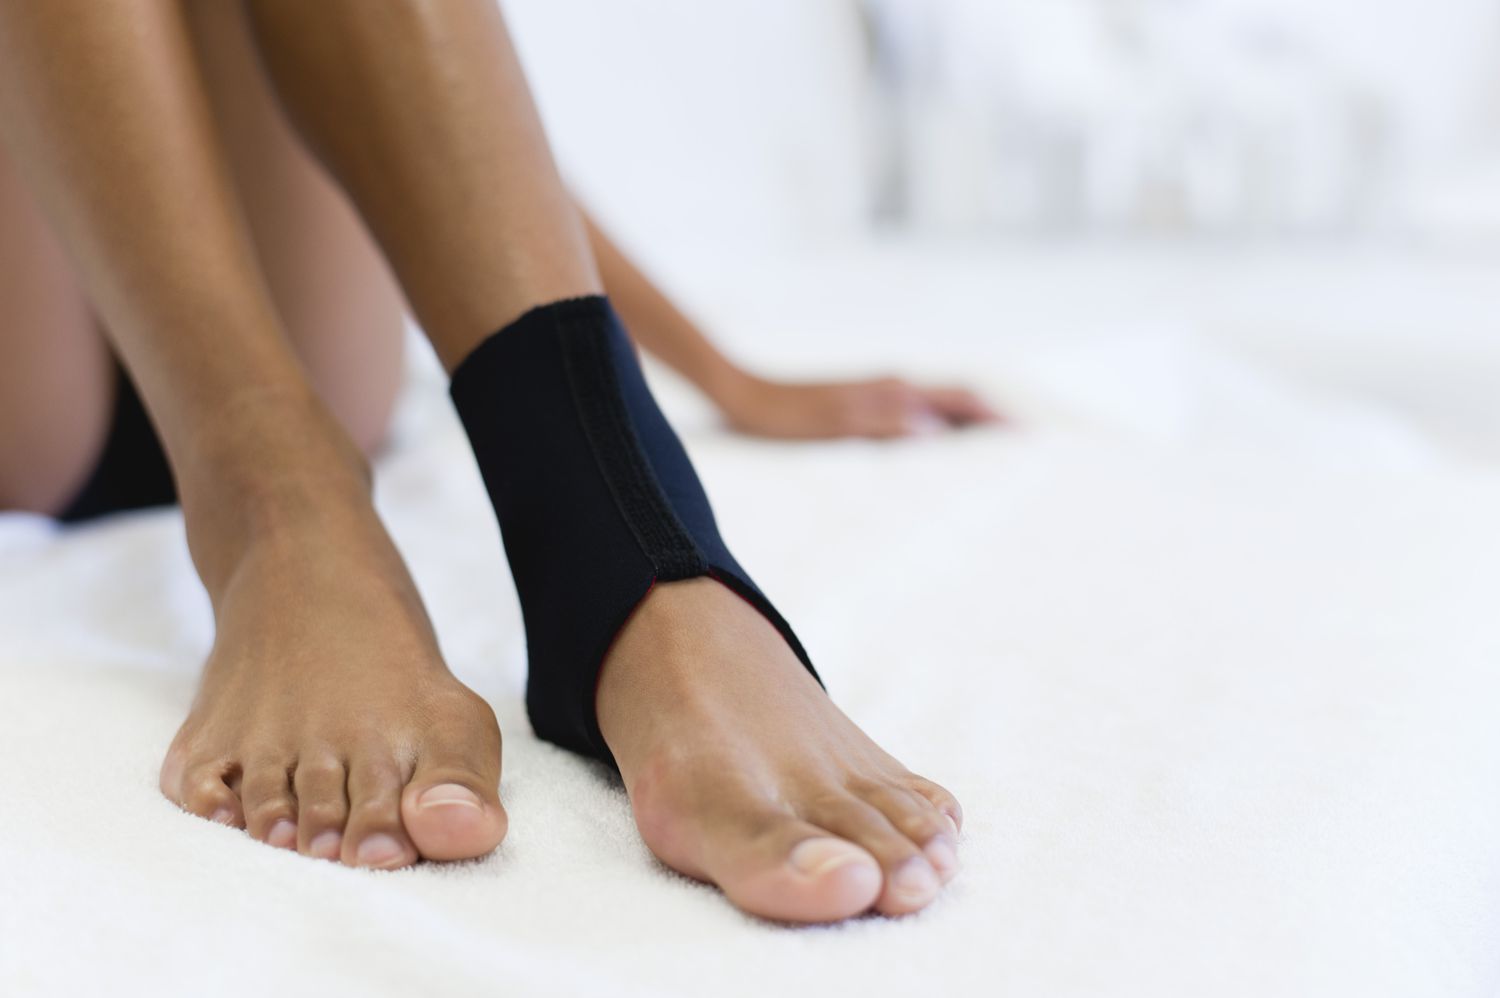 Ankle Arthritis Causes, Symptoms, and Treatment